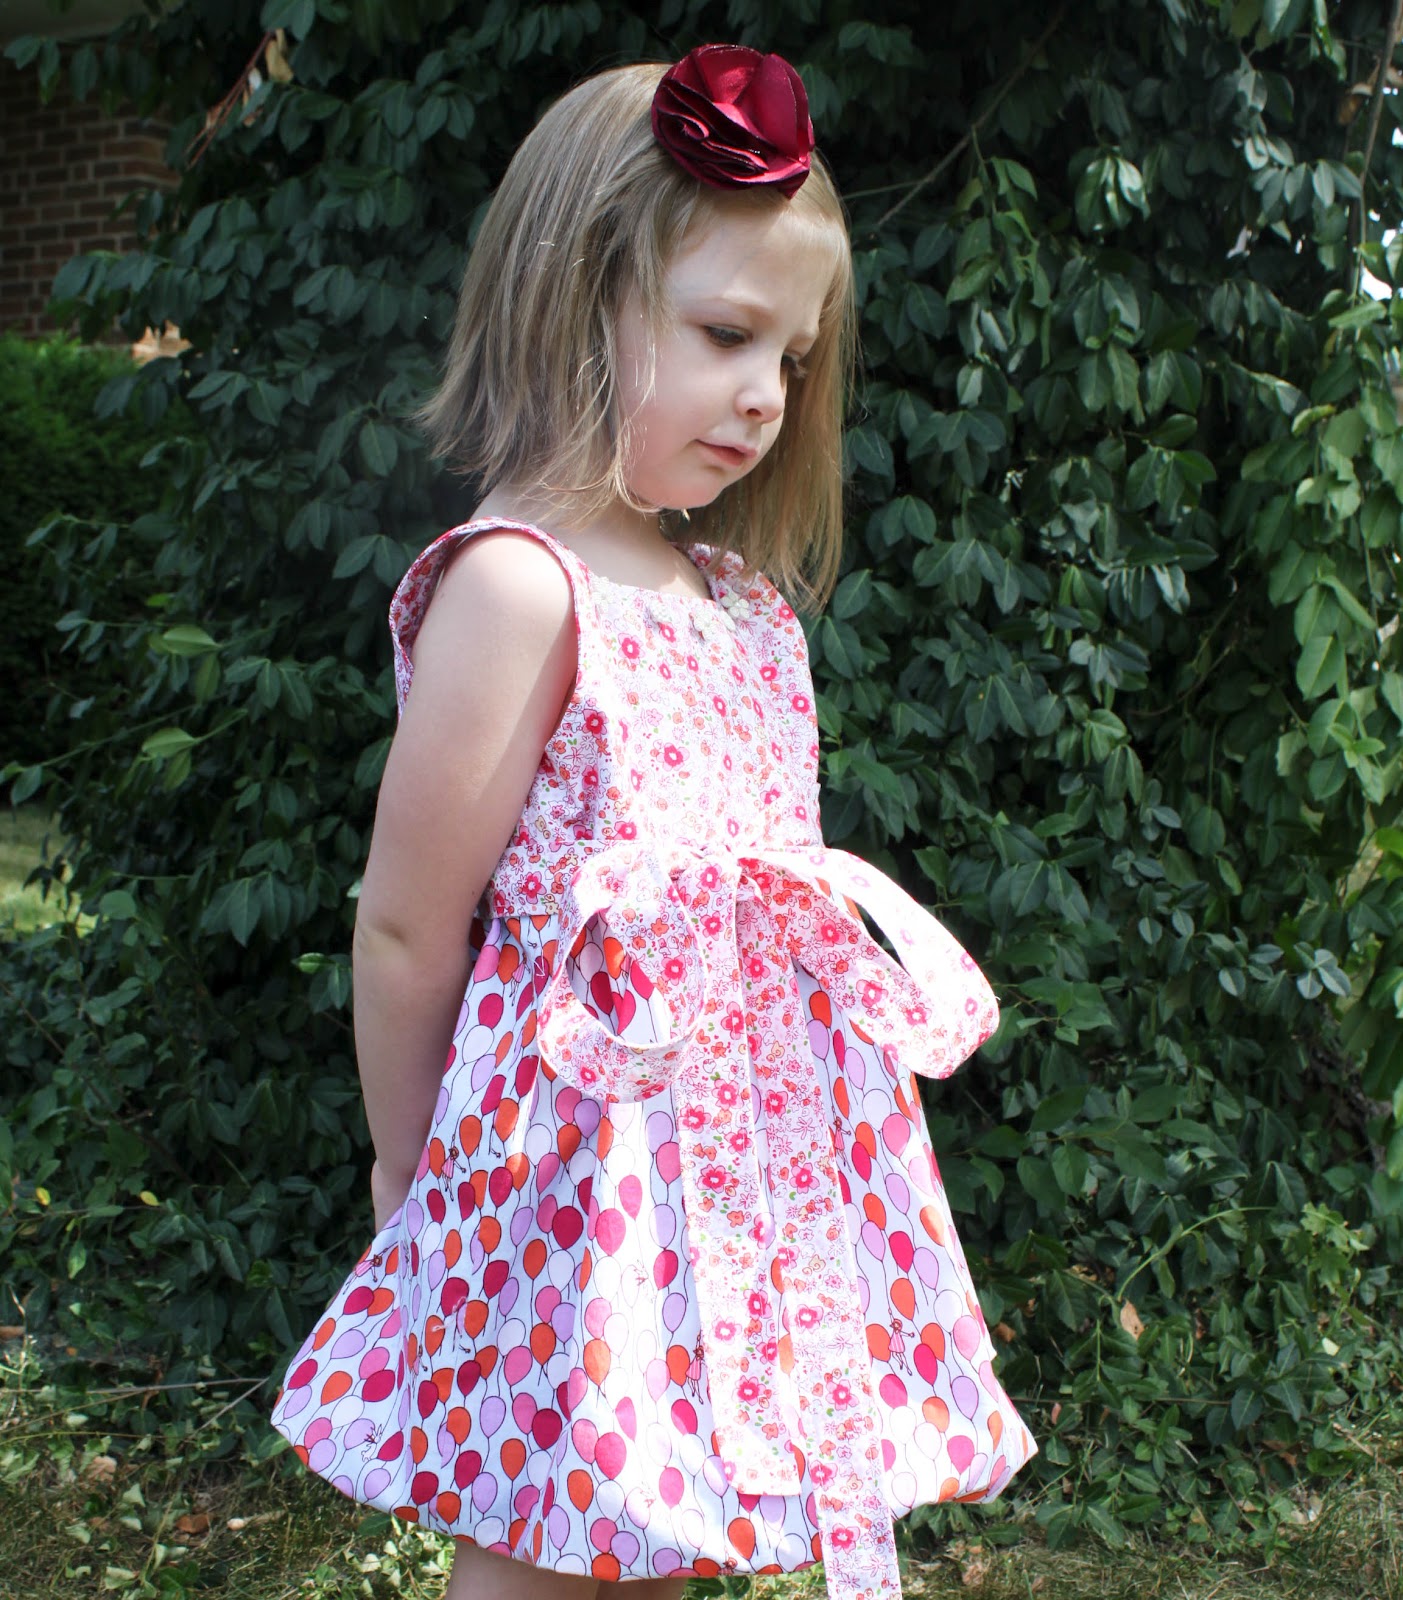 sew easy being green: Is That Another Bubble Dress? A tutorial